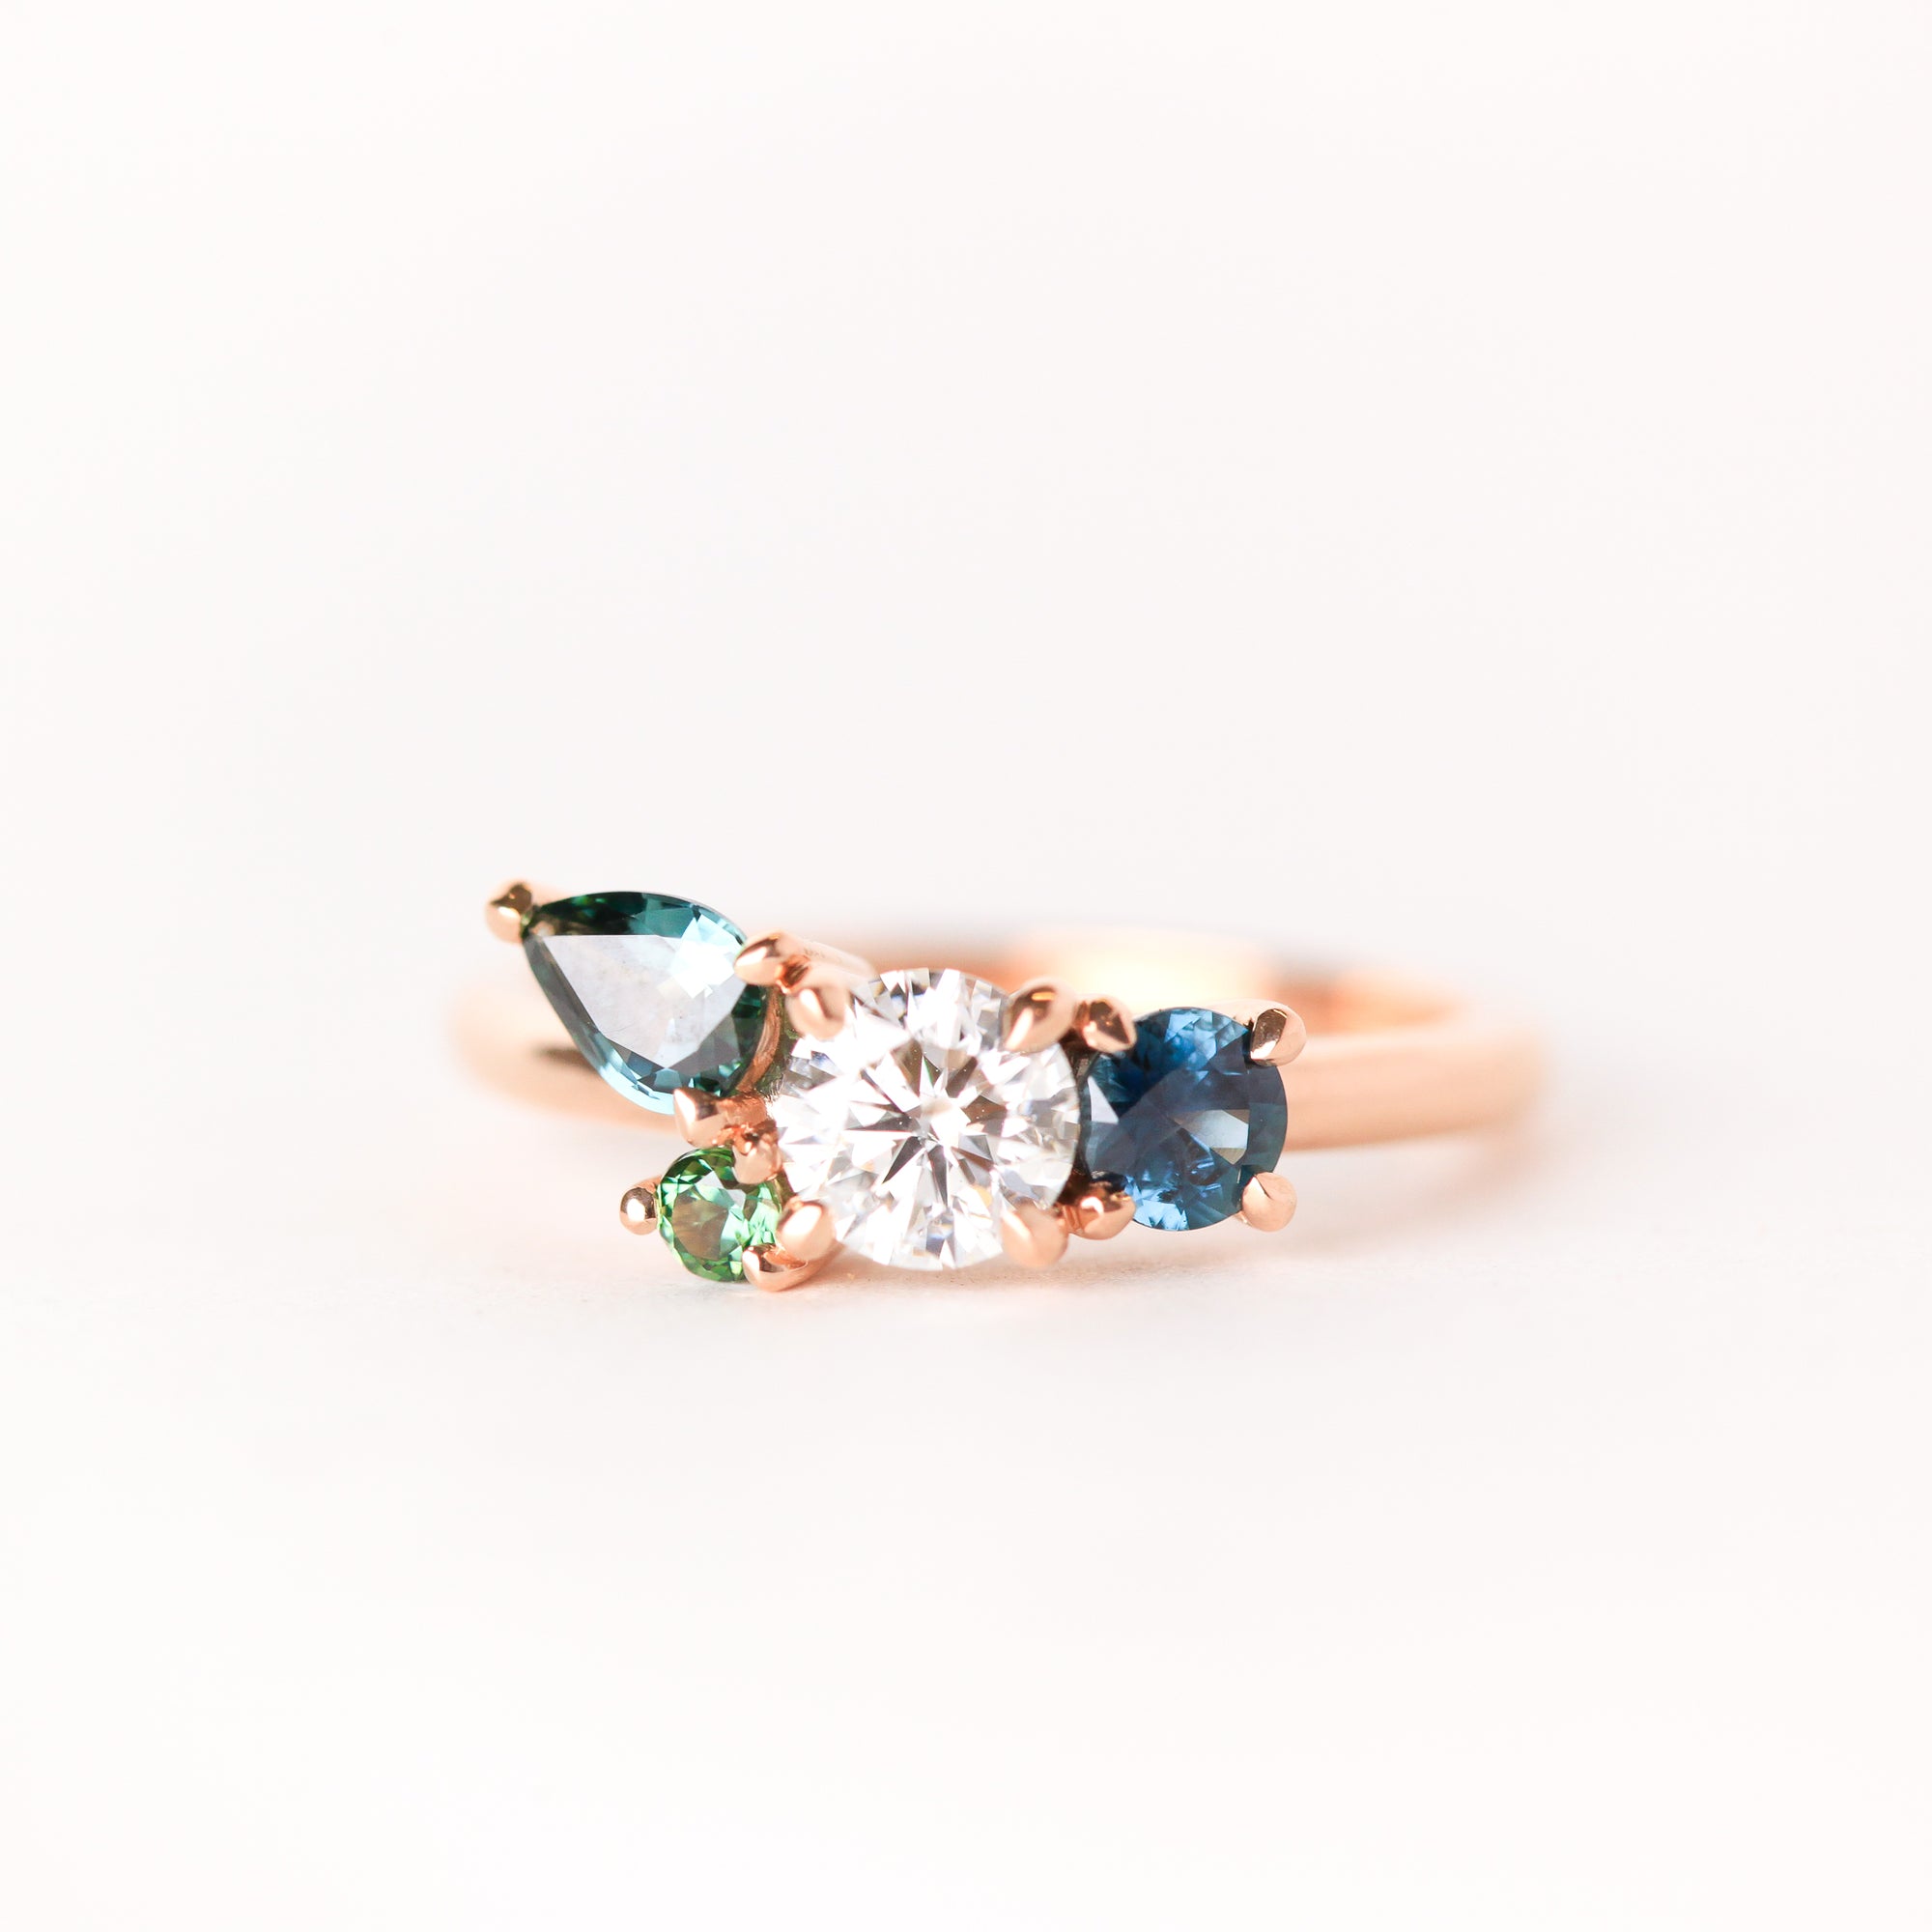 Cluster ring with central diamond, surrounded by sapphires in both round and pear shapes. Made in Melbourne. 